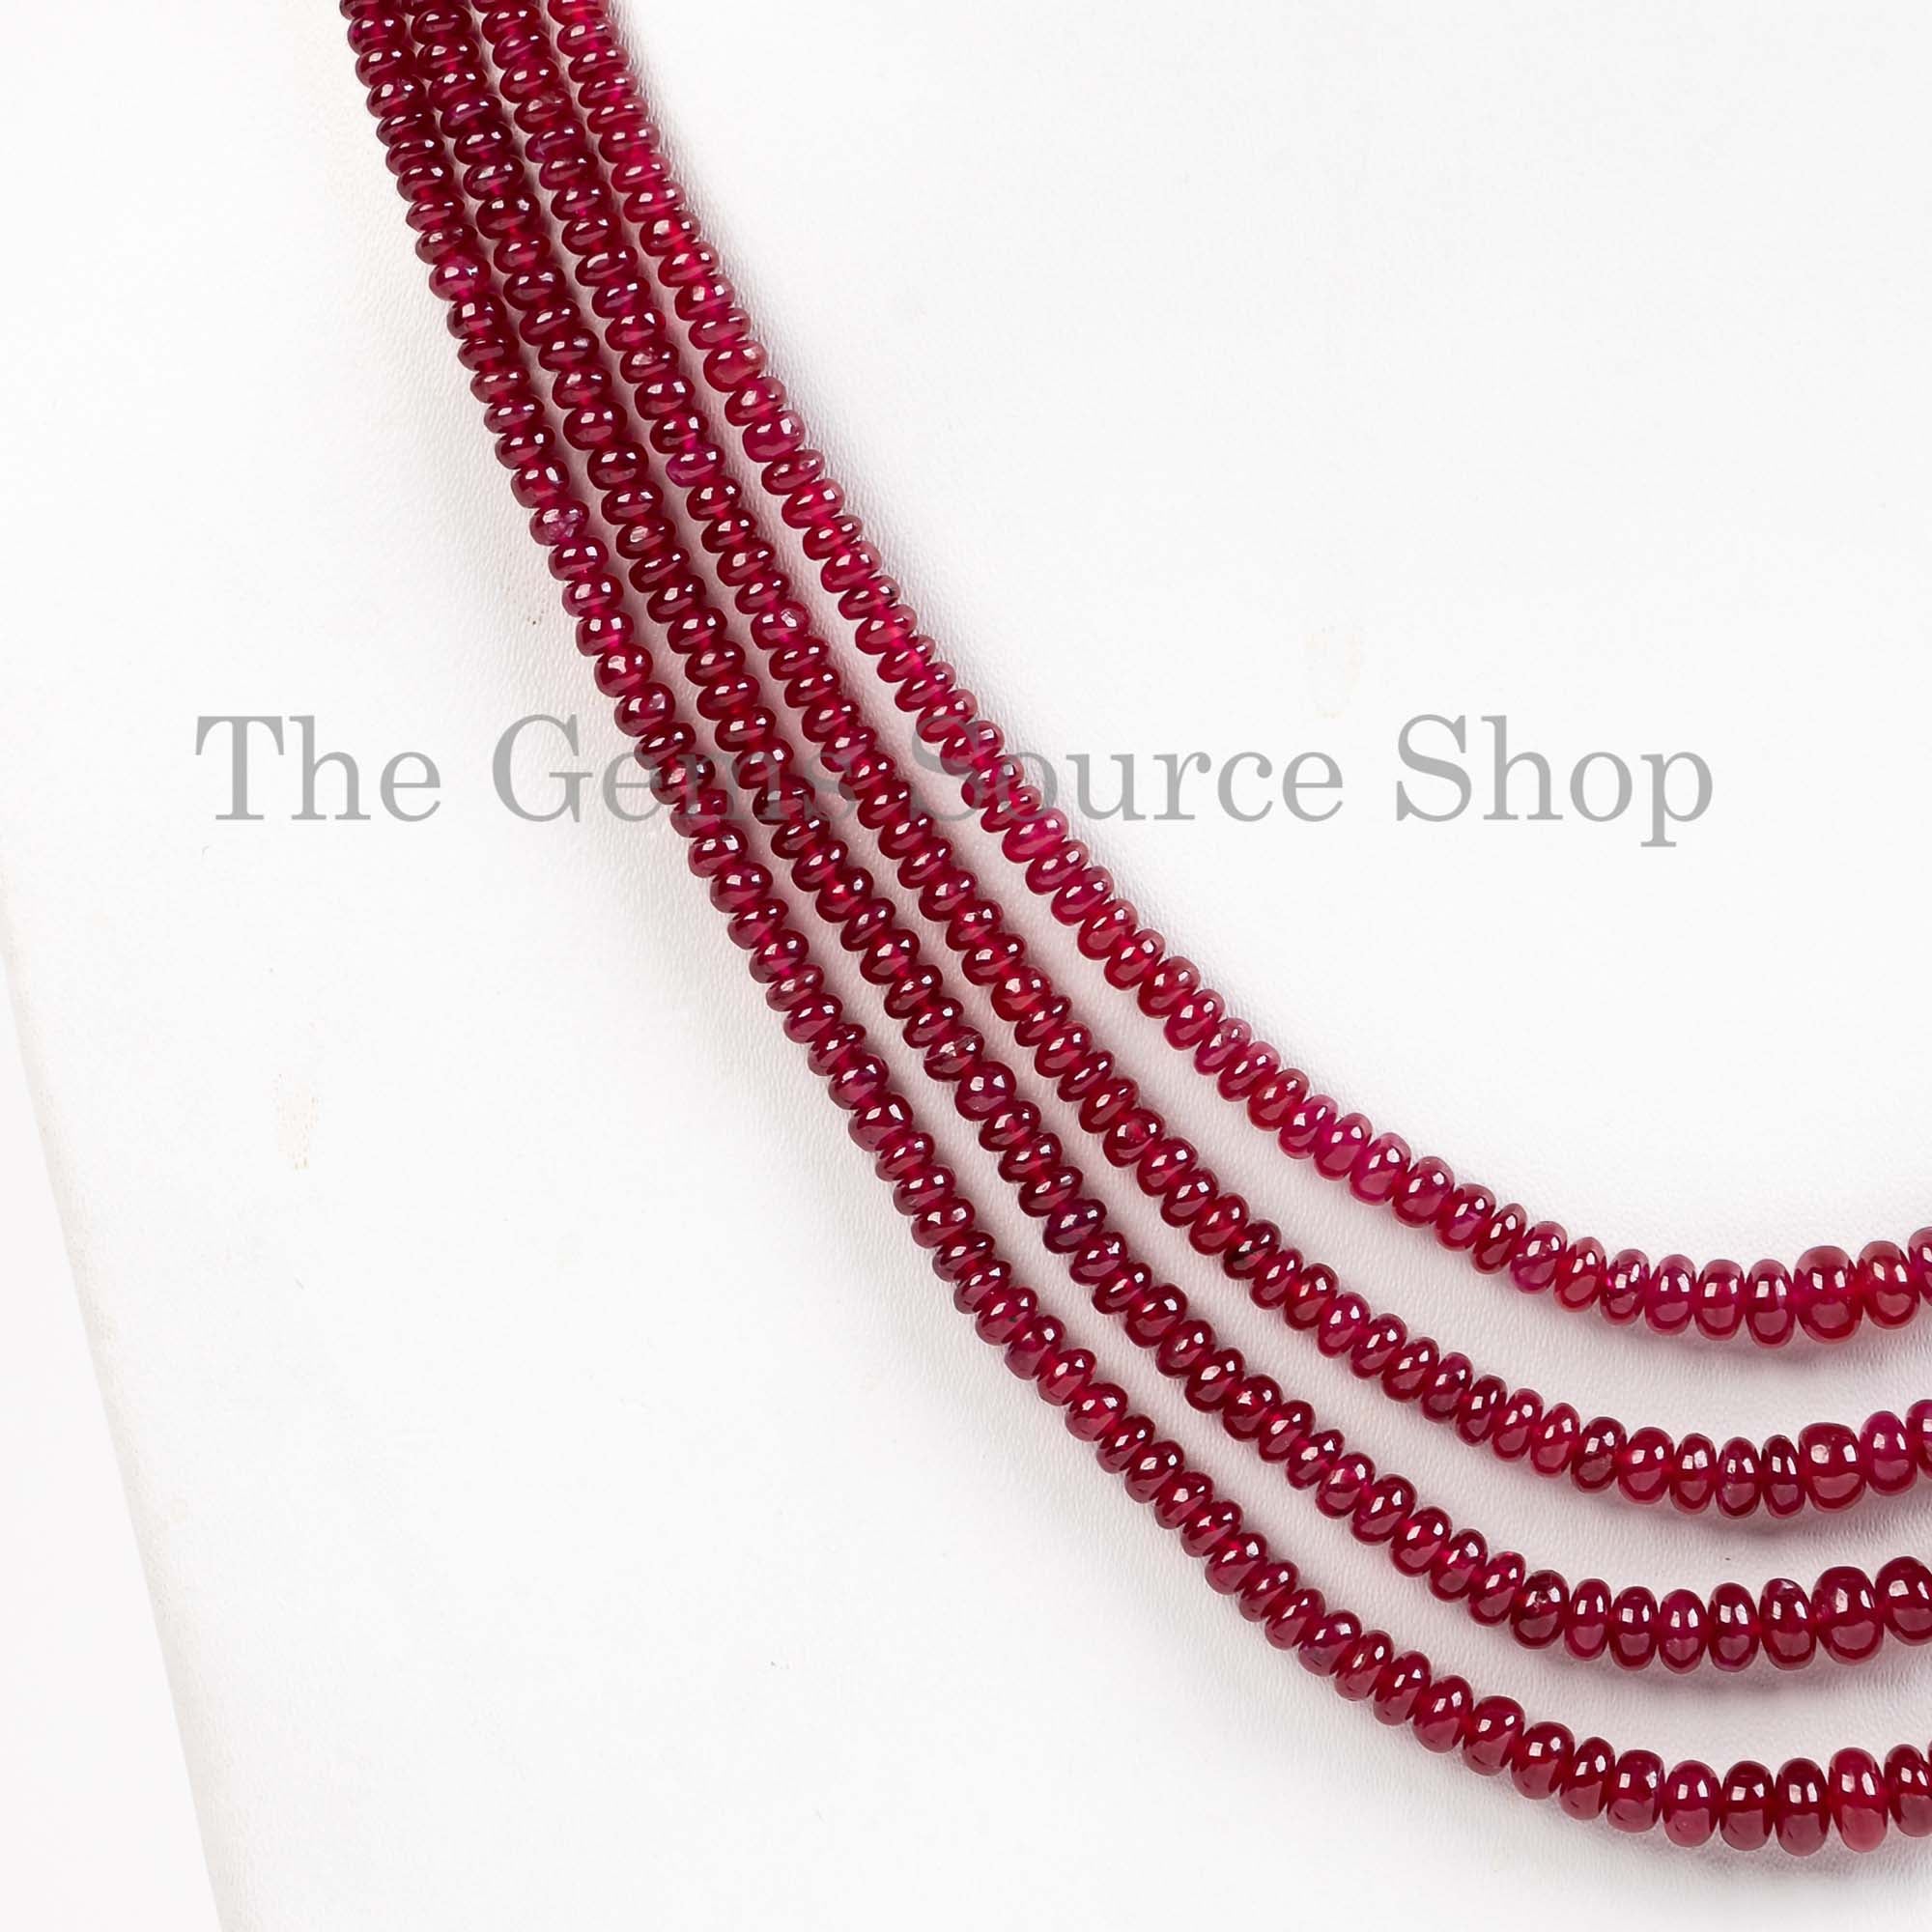 AAA Quality 4 Lines Ruby Plain Rondelle Beads Necklace, Natural Ruby Necklace, Rondelle Necklace